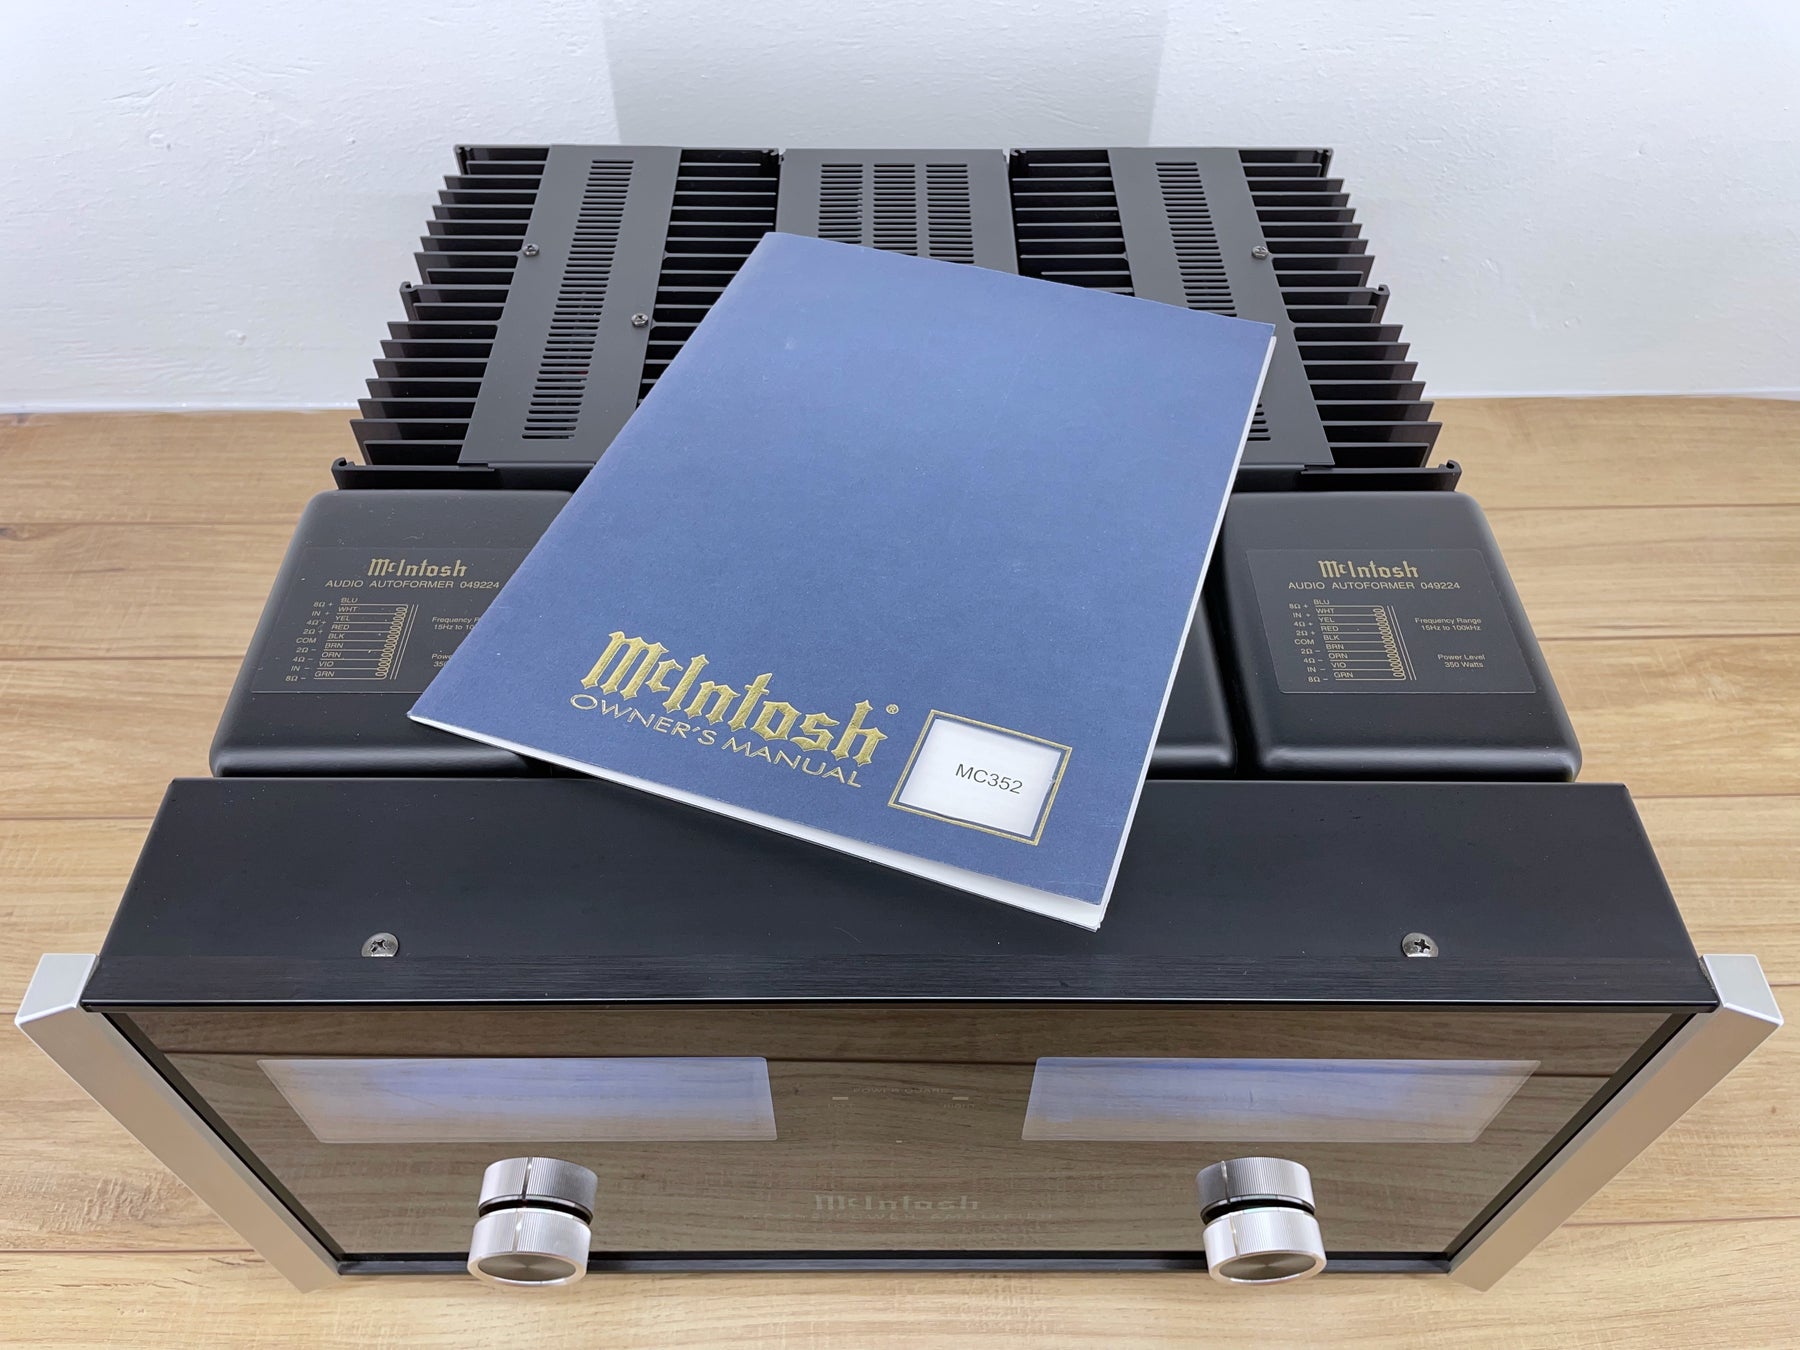 McIntosh MC352 Power Amp. LEDs installed and Serviced. Factory Packaging and Manual Included